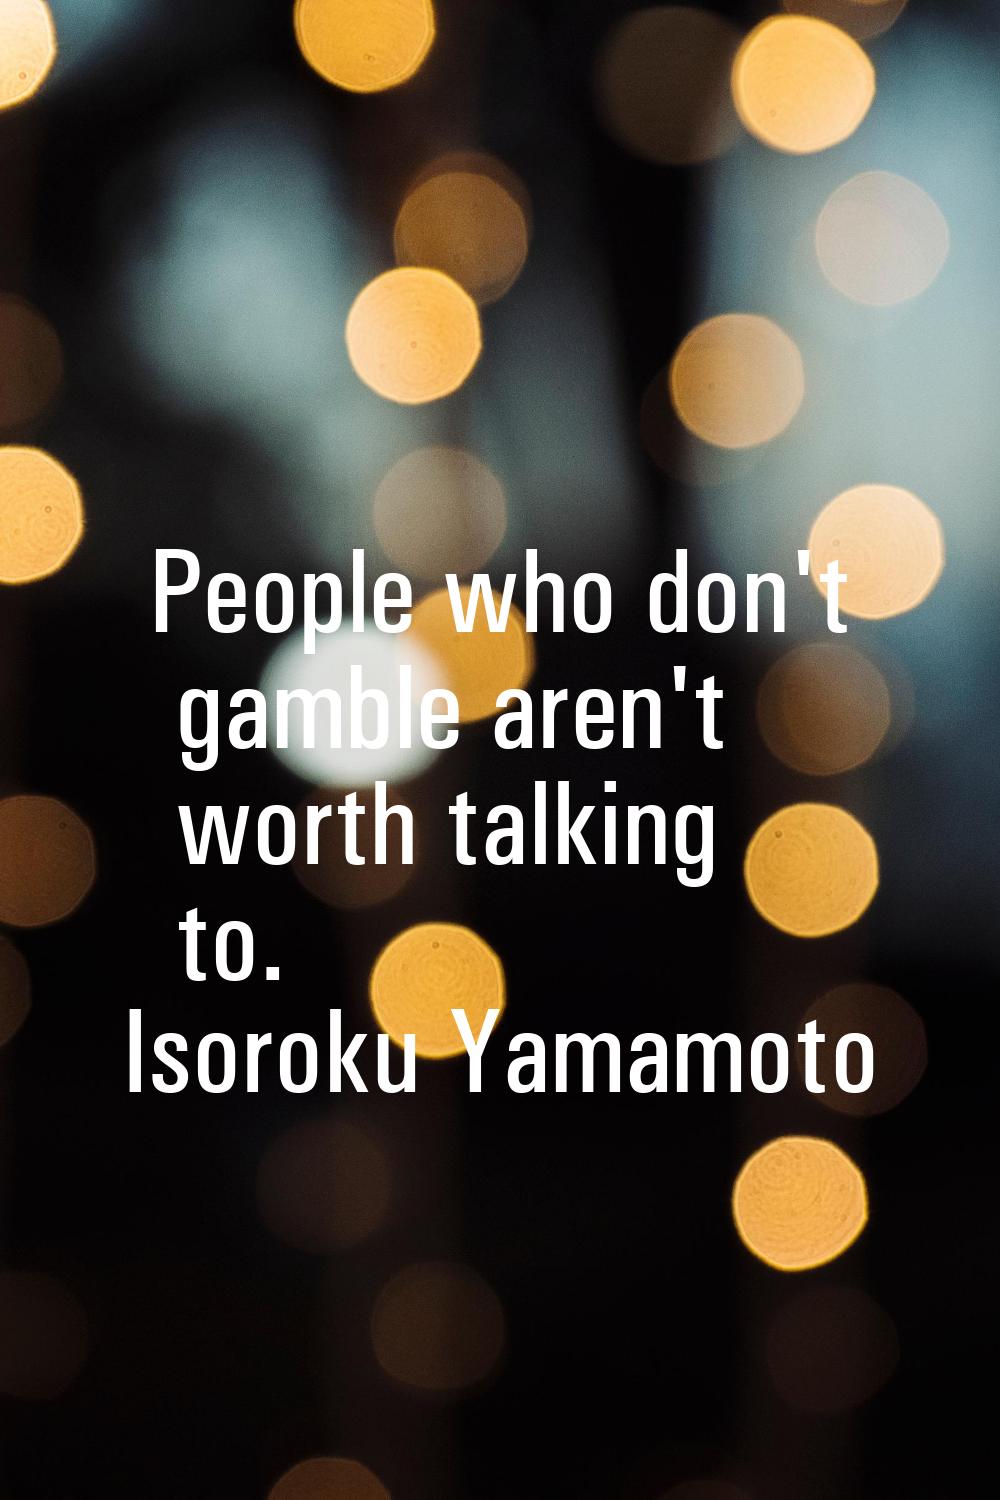 People who don't gamble aren't worth talking to.